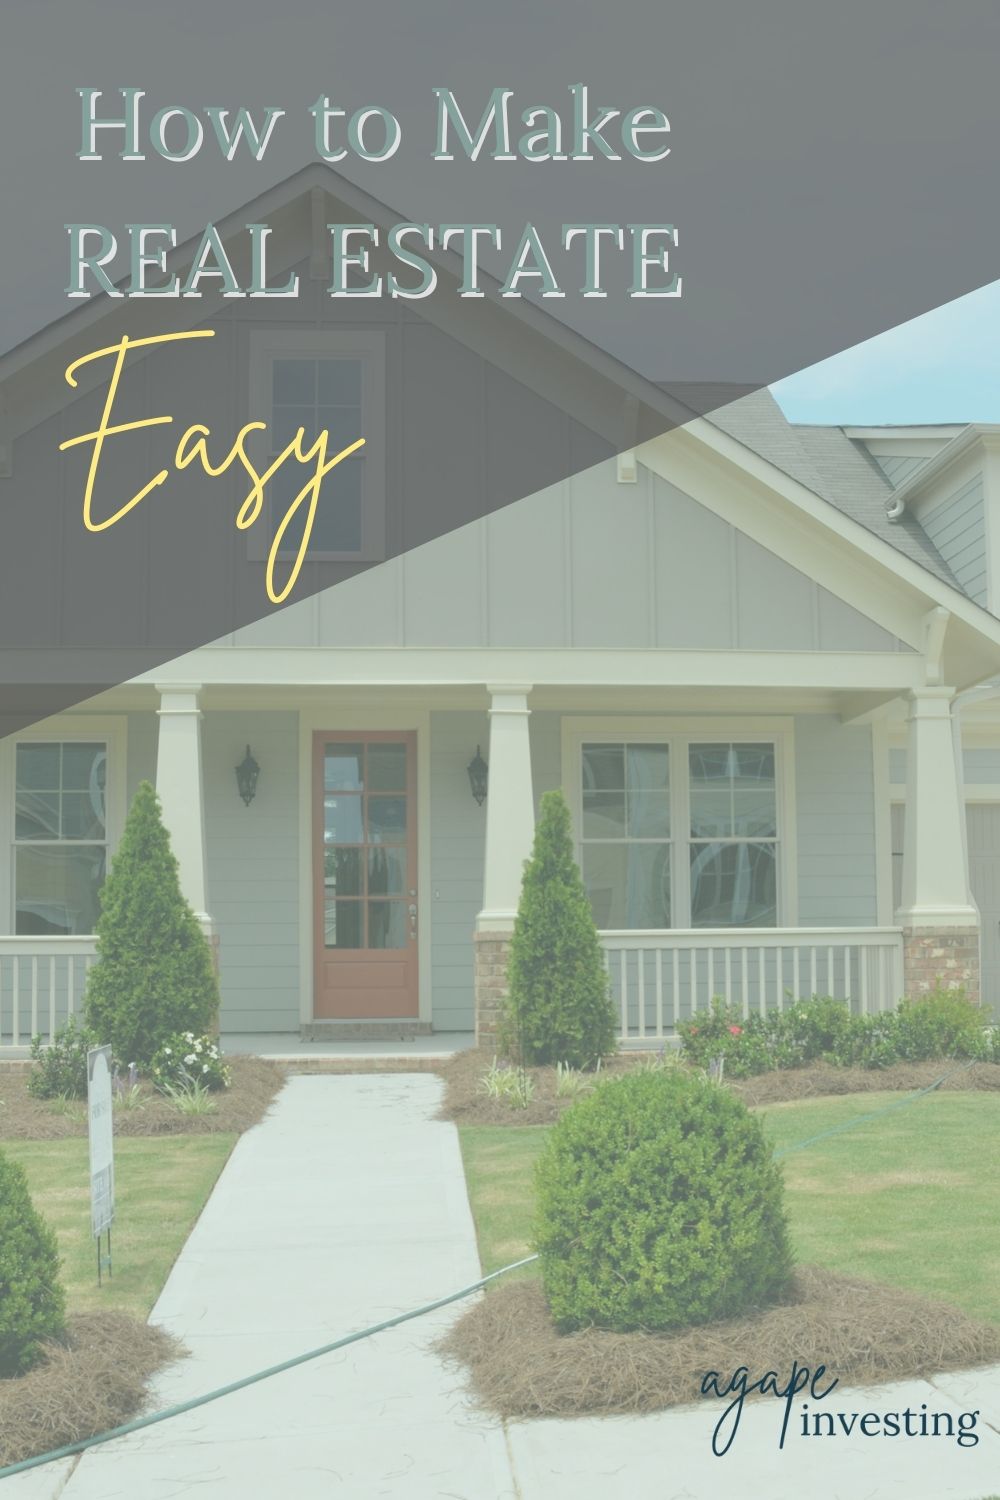 How to Make Real Estate Investing Easy